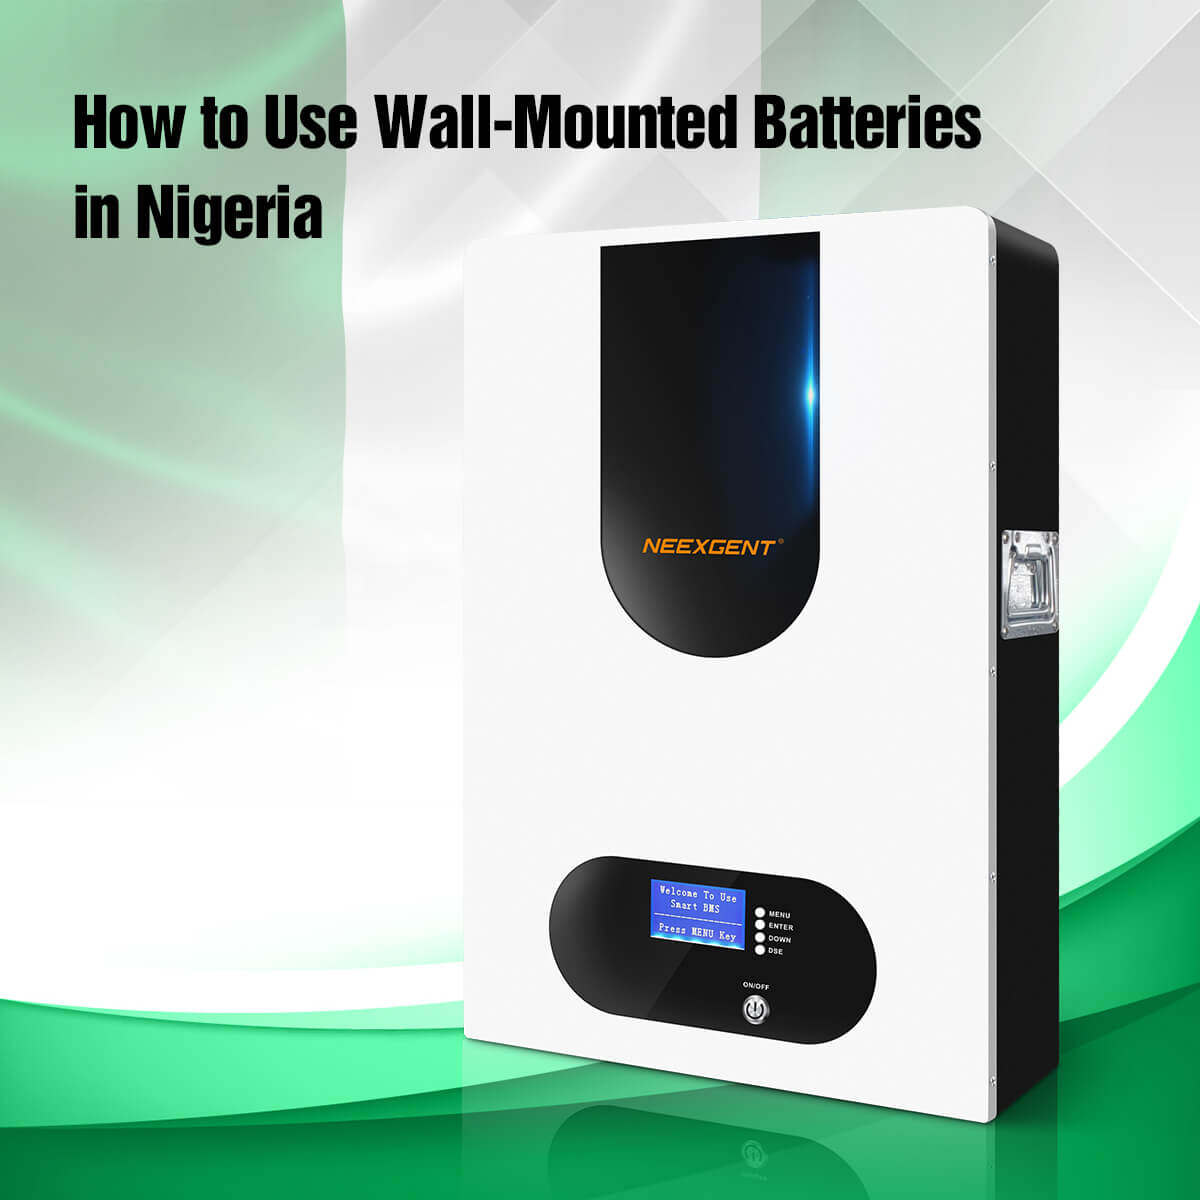 How to Use Wall-Mounted Batteries in Nigeria